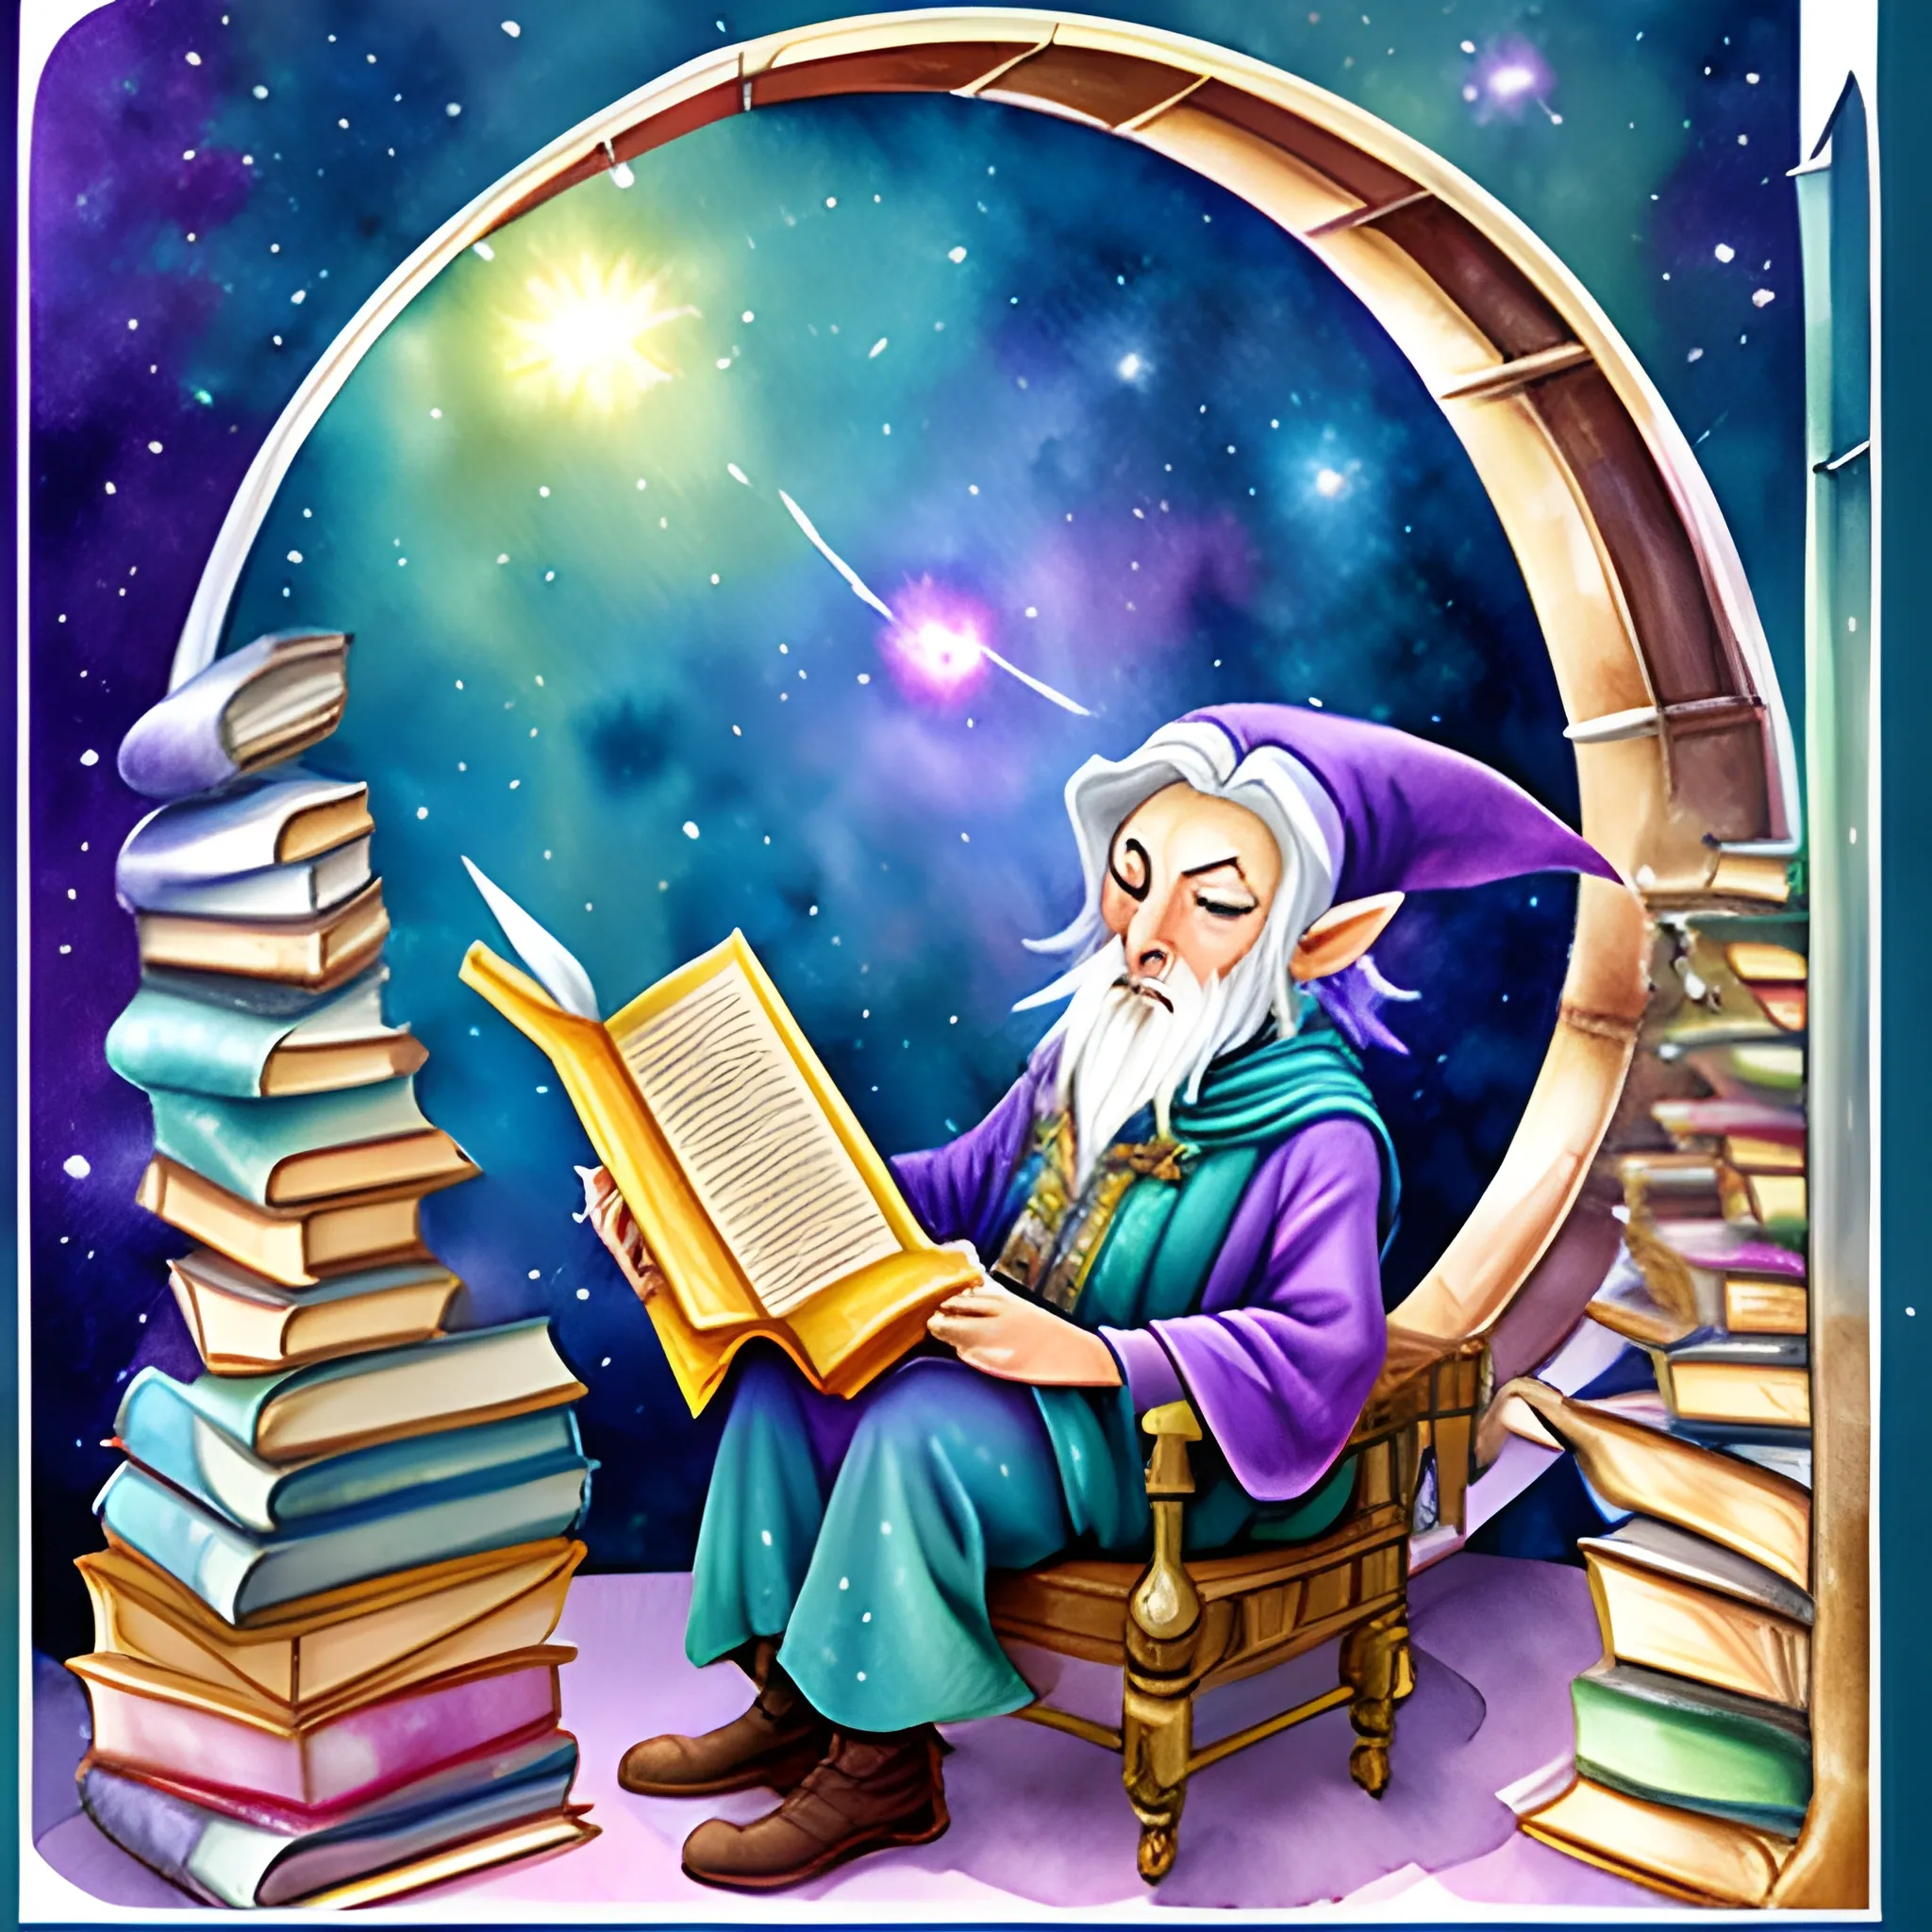 
Watercolor Fantasy Books Clipart - galaxy wizard is trying to read a spell from books, book stacks and shelves, magical power books, wizard room.